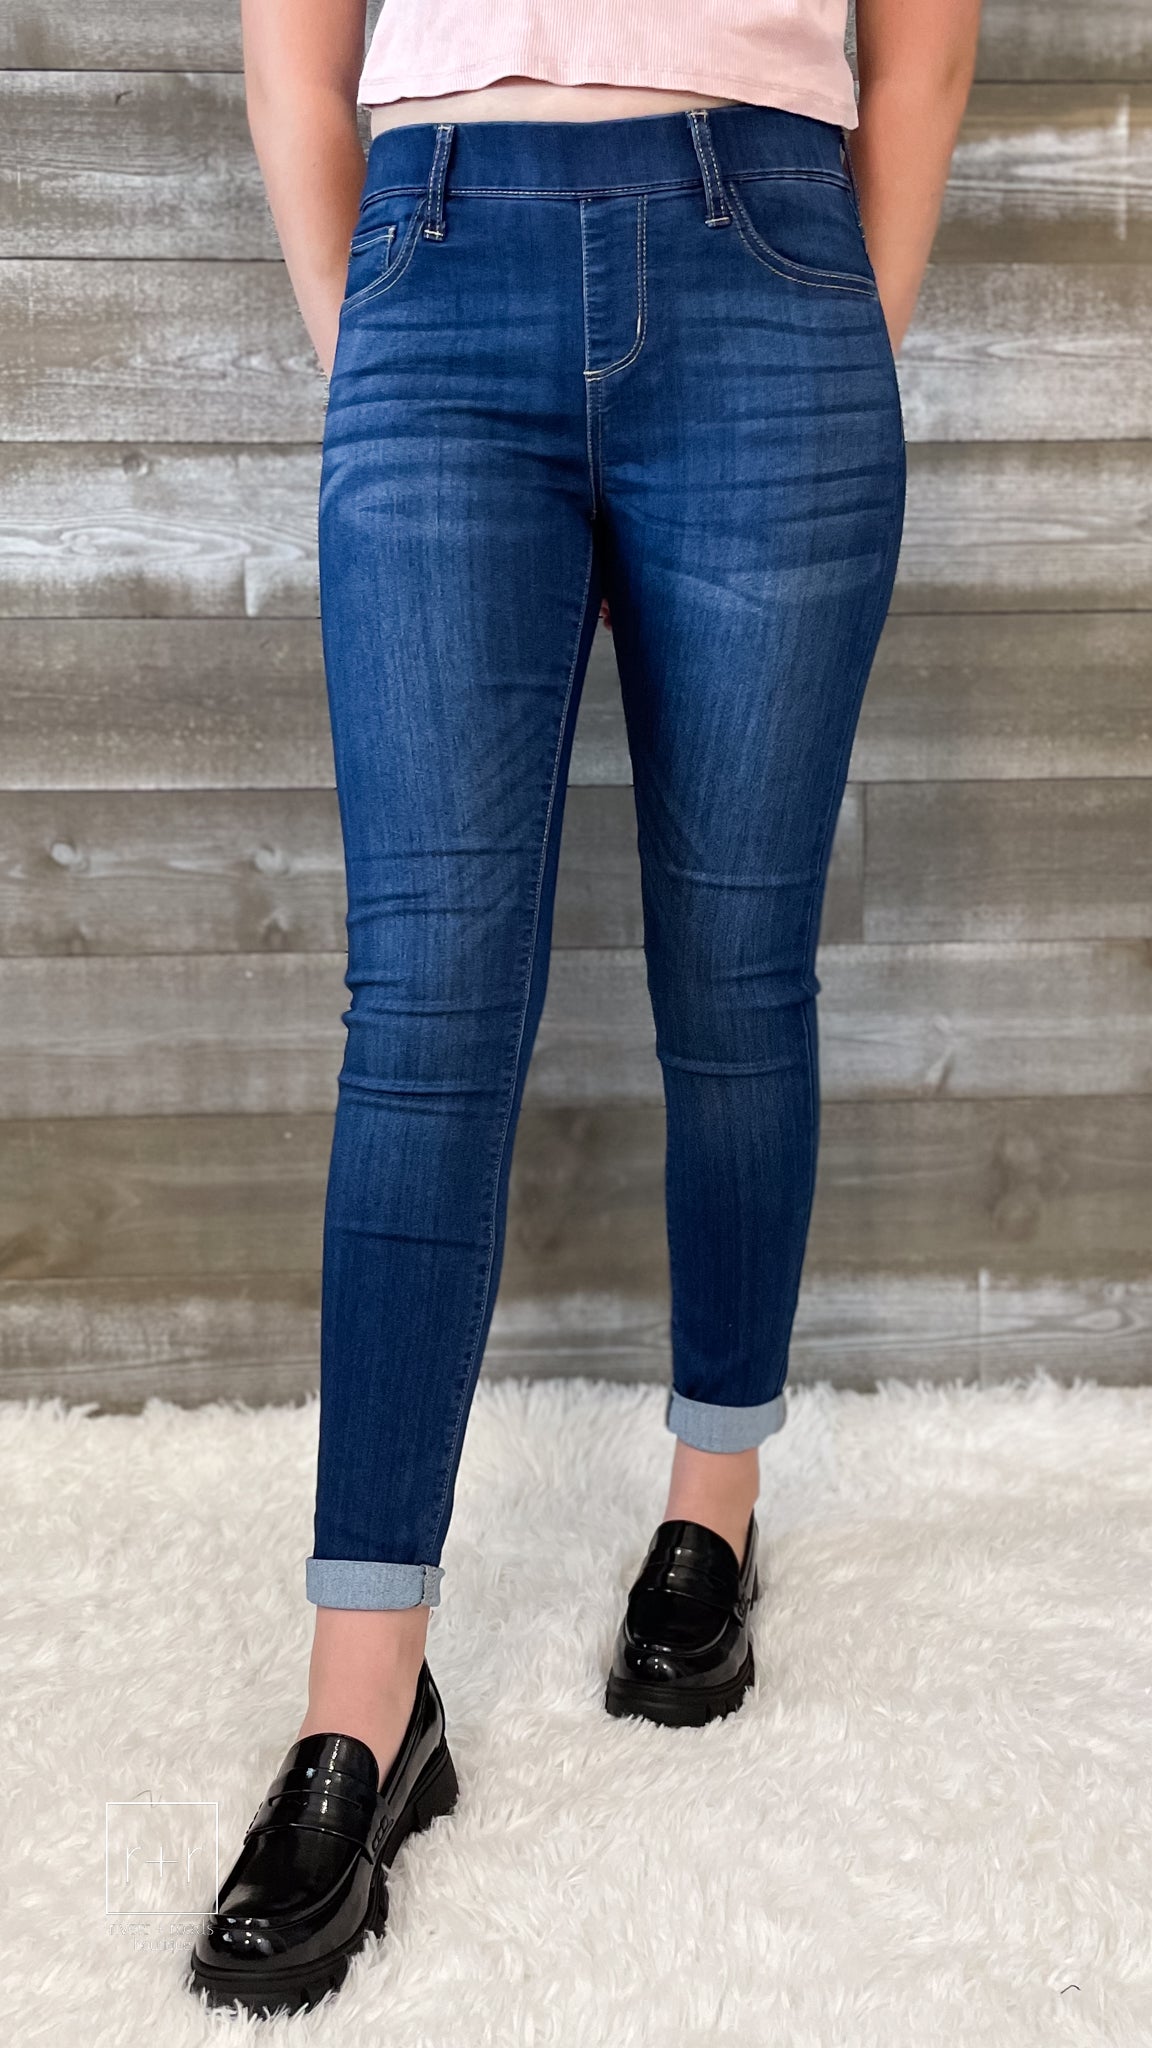 cello jeans pull on skinny crop mid rise jeans with rolled hem in dark wash AB76535DK